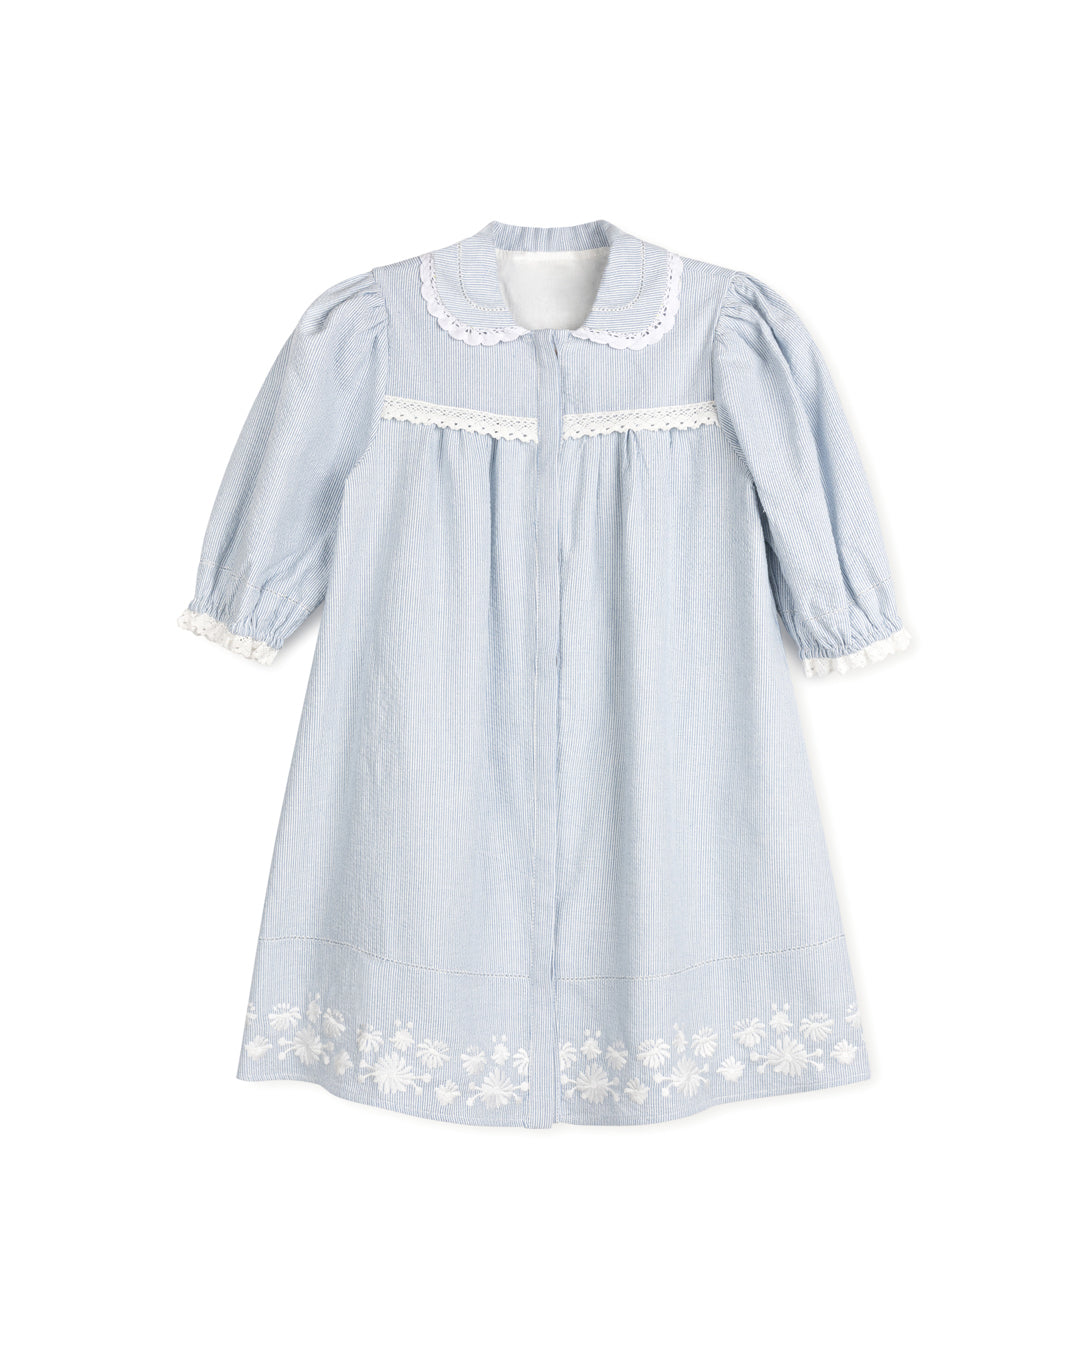 ONE CHILD BLUE STRIPED LACE TRIM EMBROIDERED DRESS [FINAL SALE]